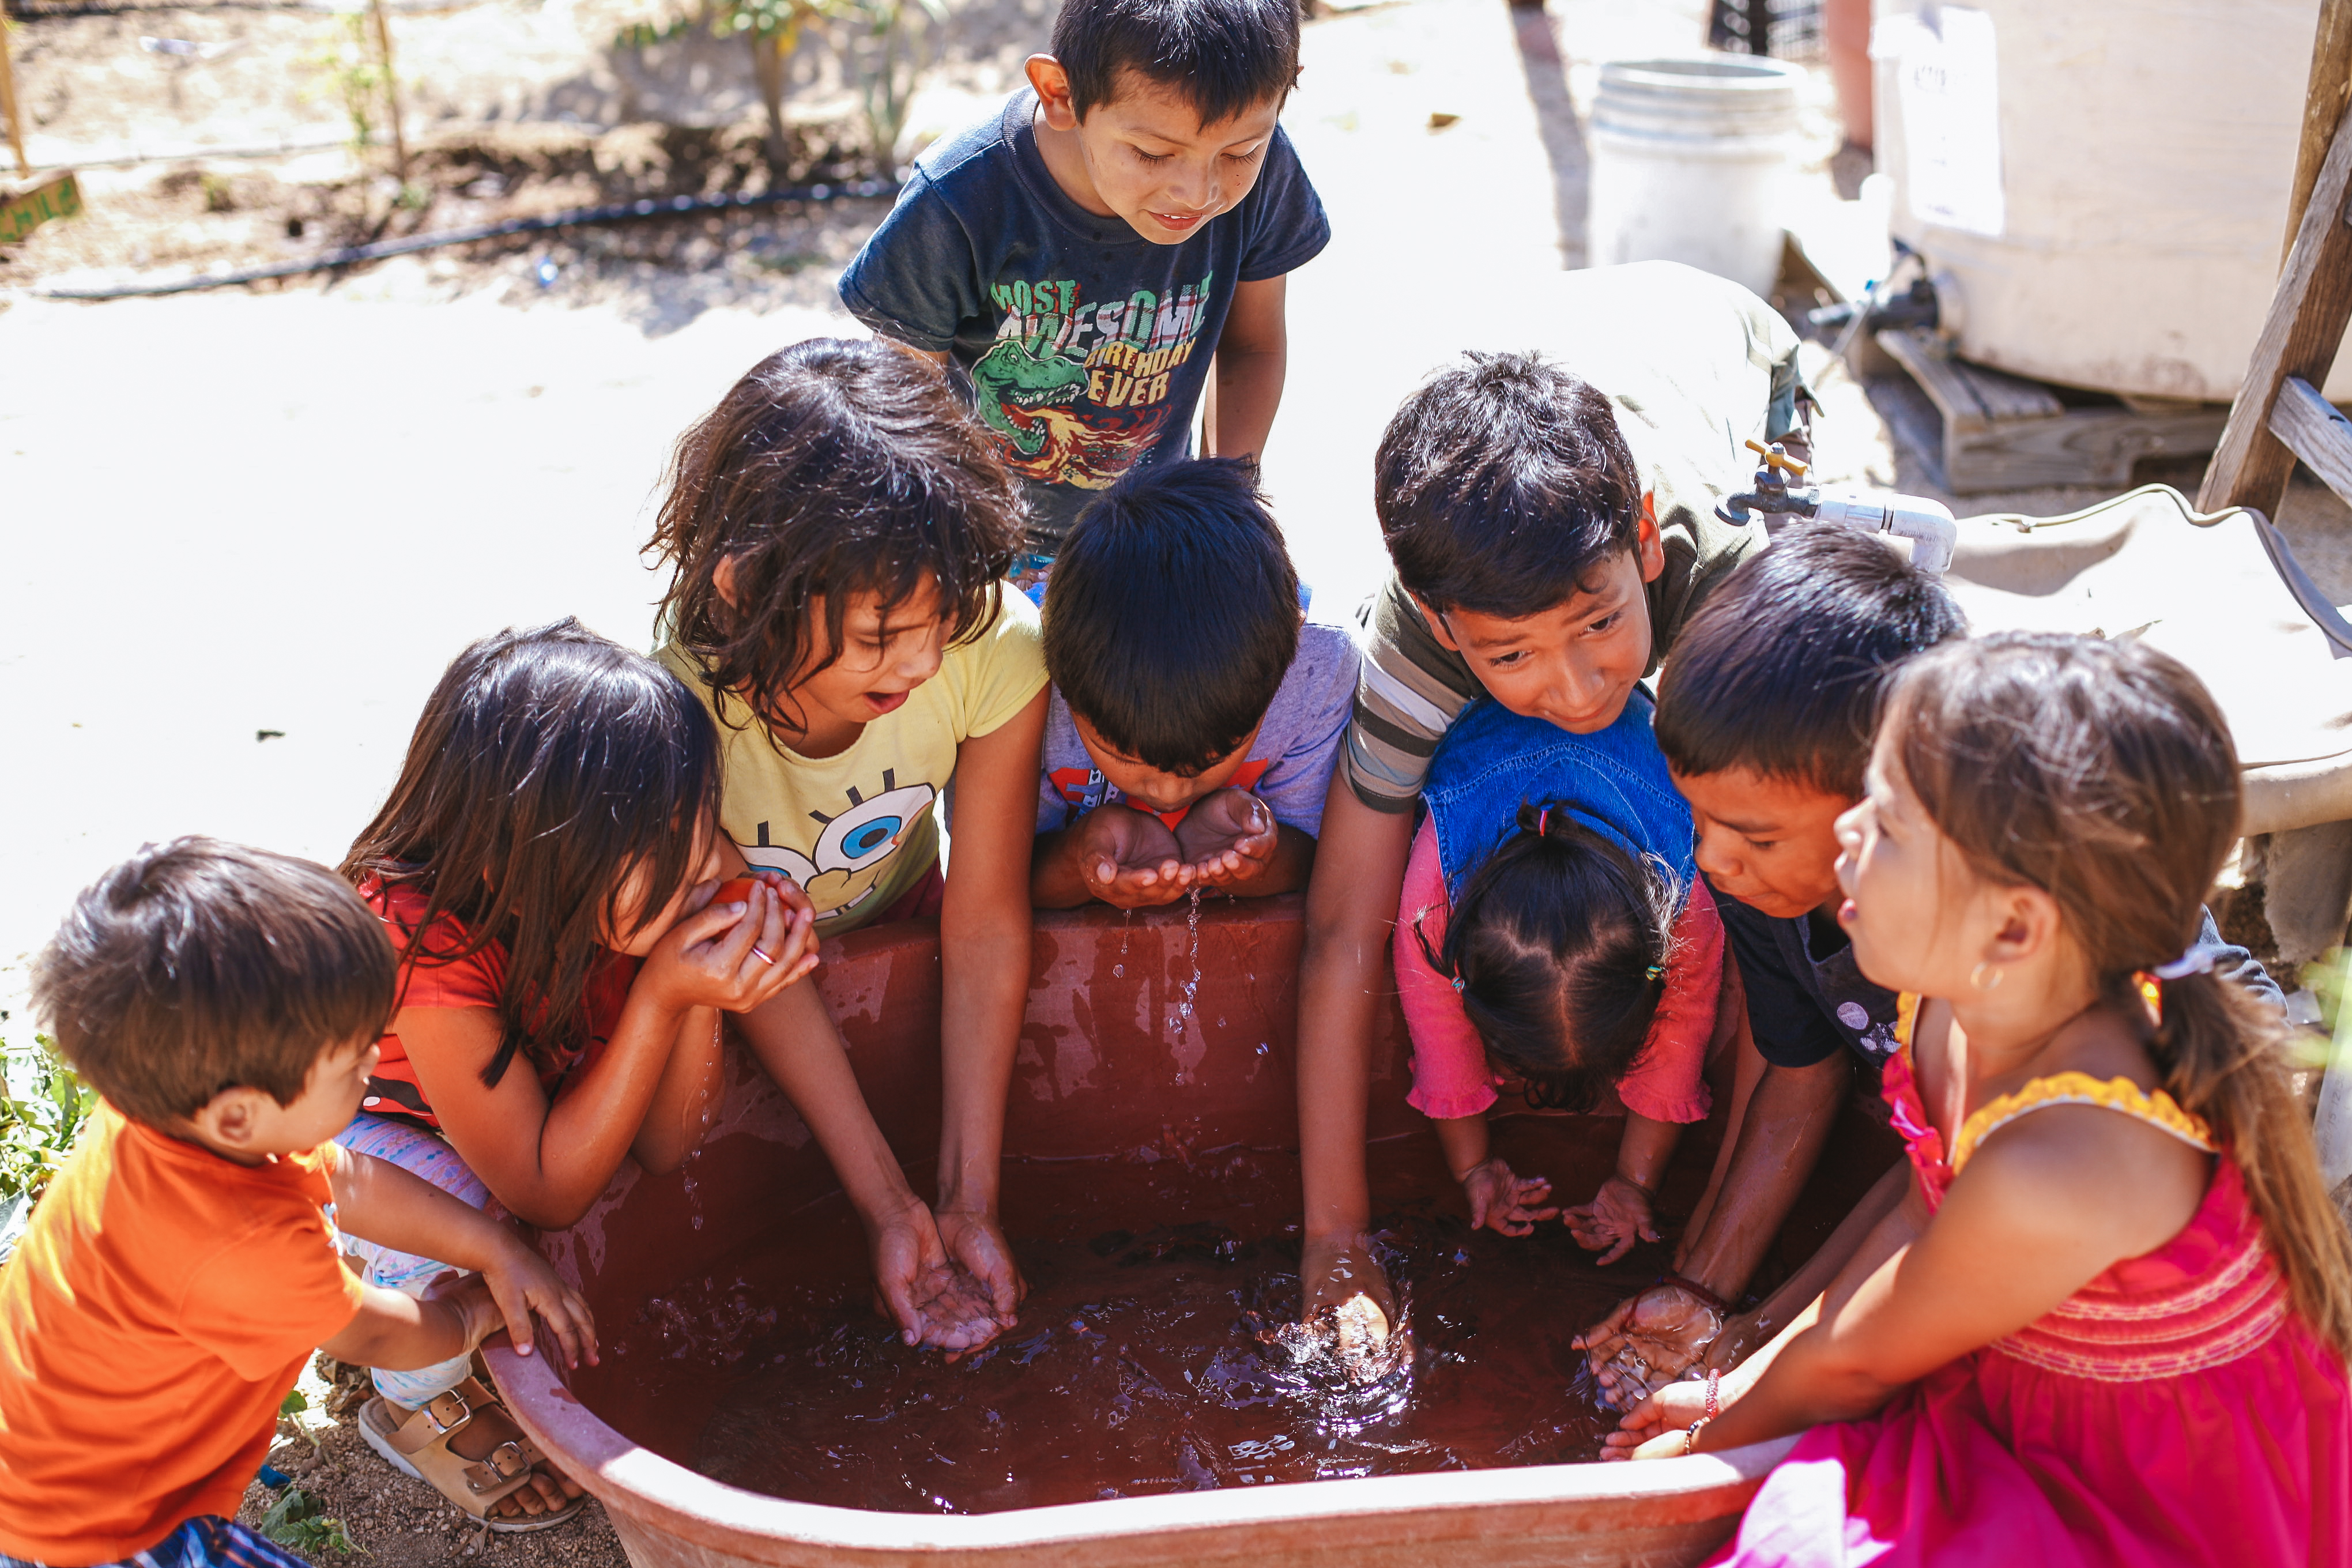 Children wash their hands in a tub full of water